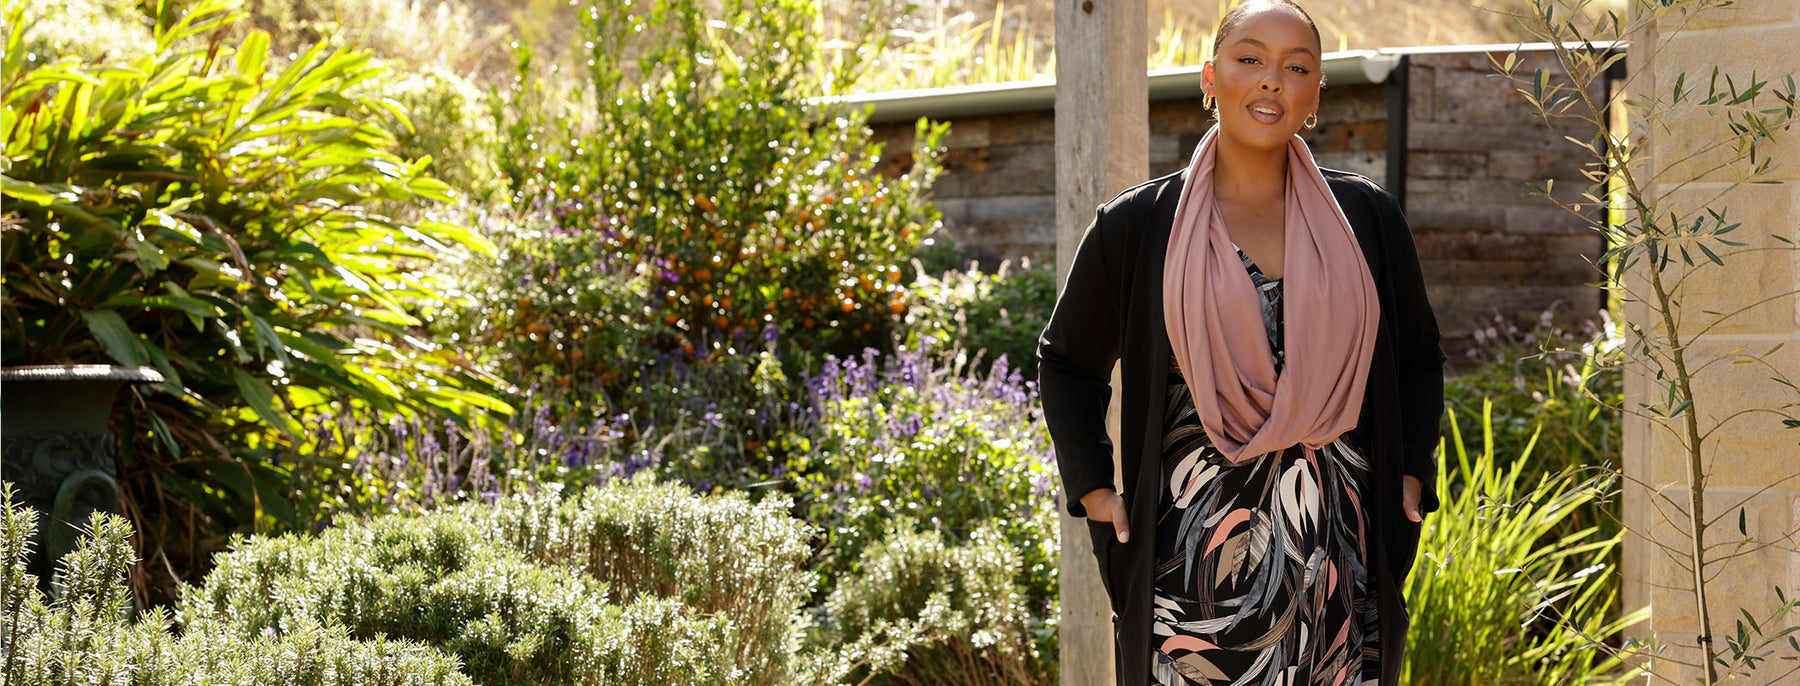 a plus size woman shows how to do winter layering with a floral print jersey dress worn under a black coat and a pink bamboo jersey scarf. Shop the look at Australian and New Zealand women's clothing brand, Leina & Fleur.